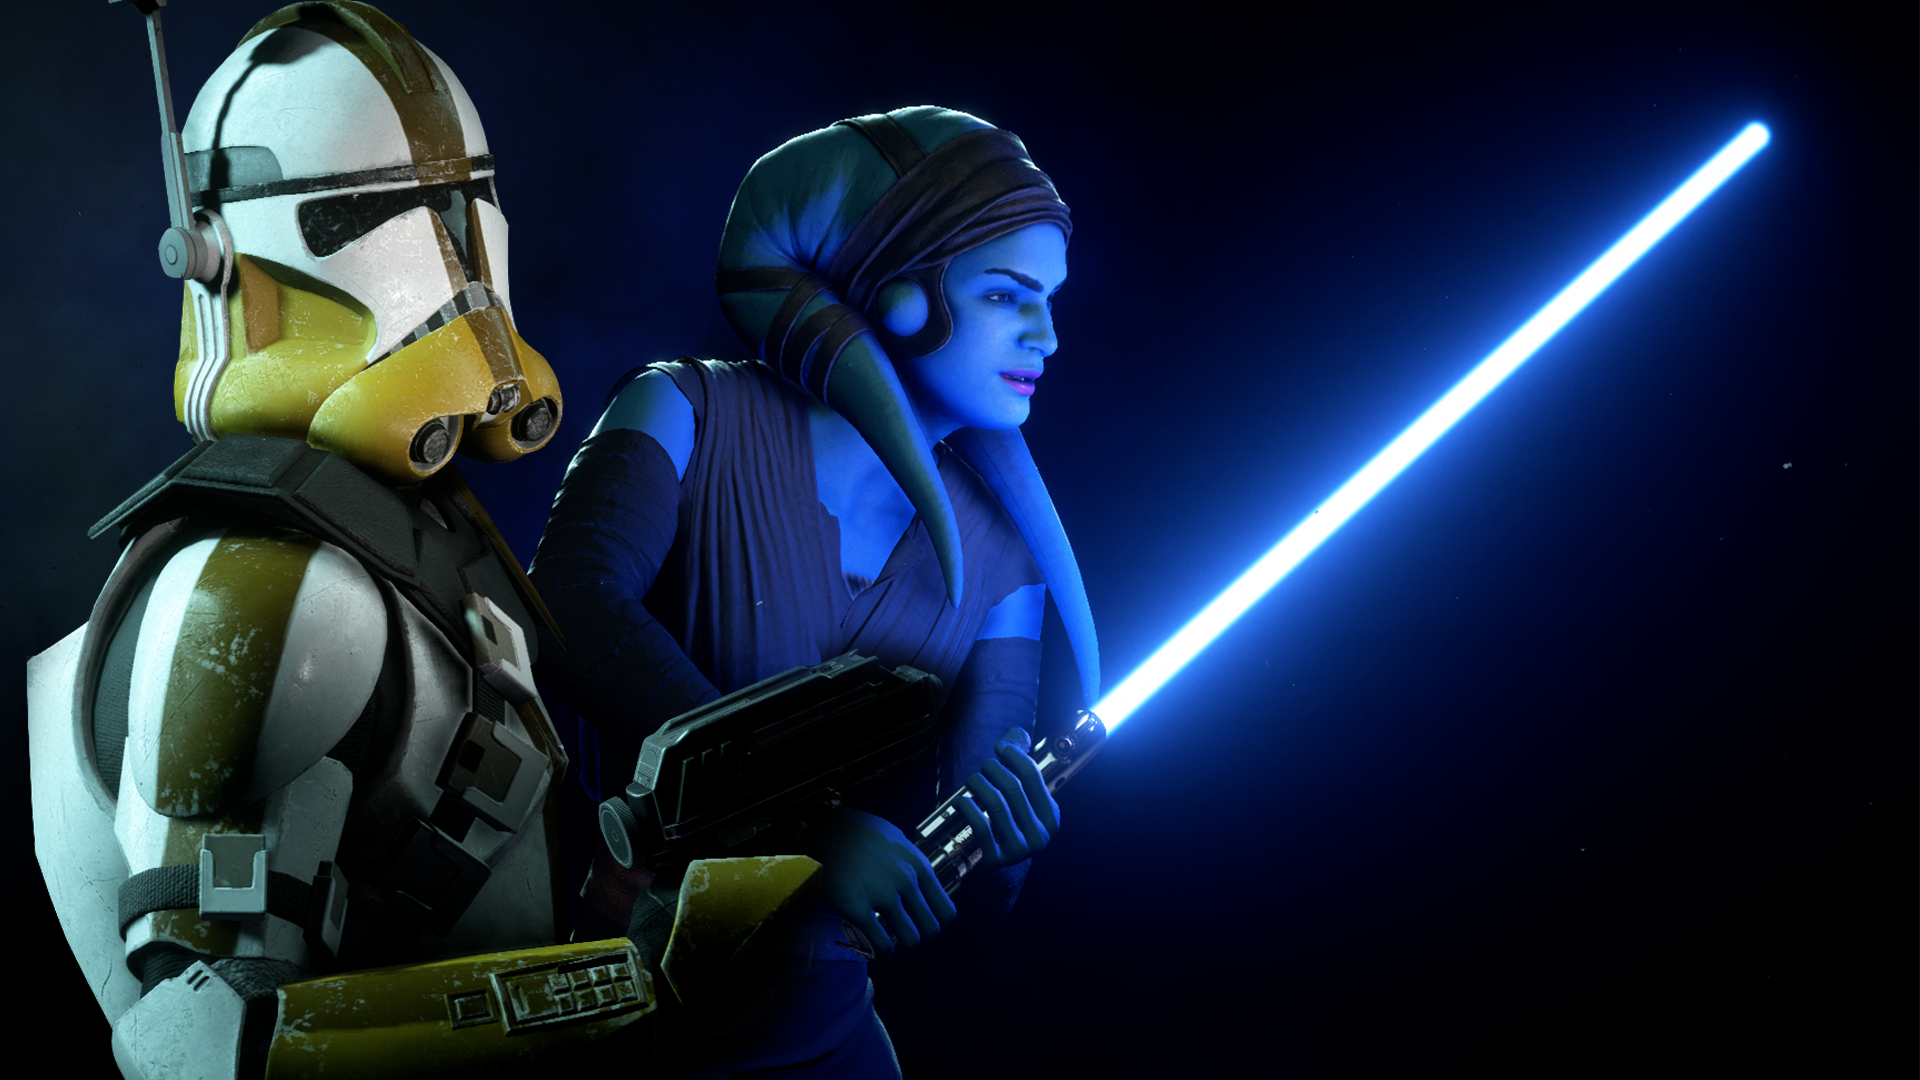 Commander Bly leading the battlefront with general Secura: StarWarsBattlefront